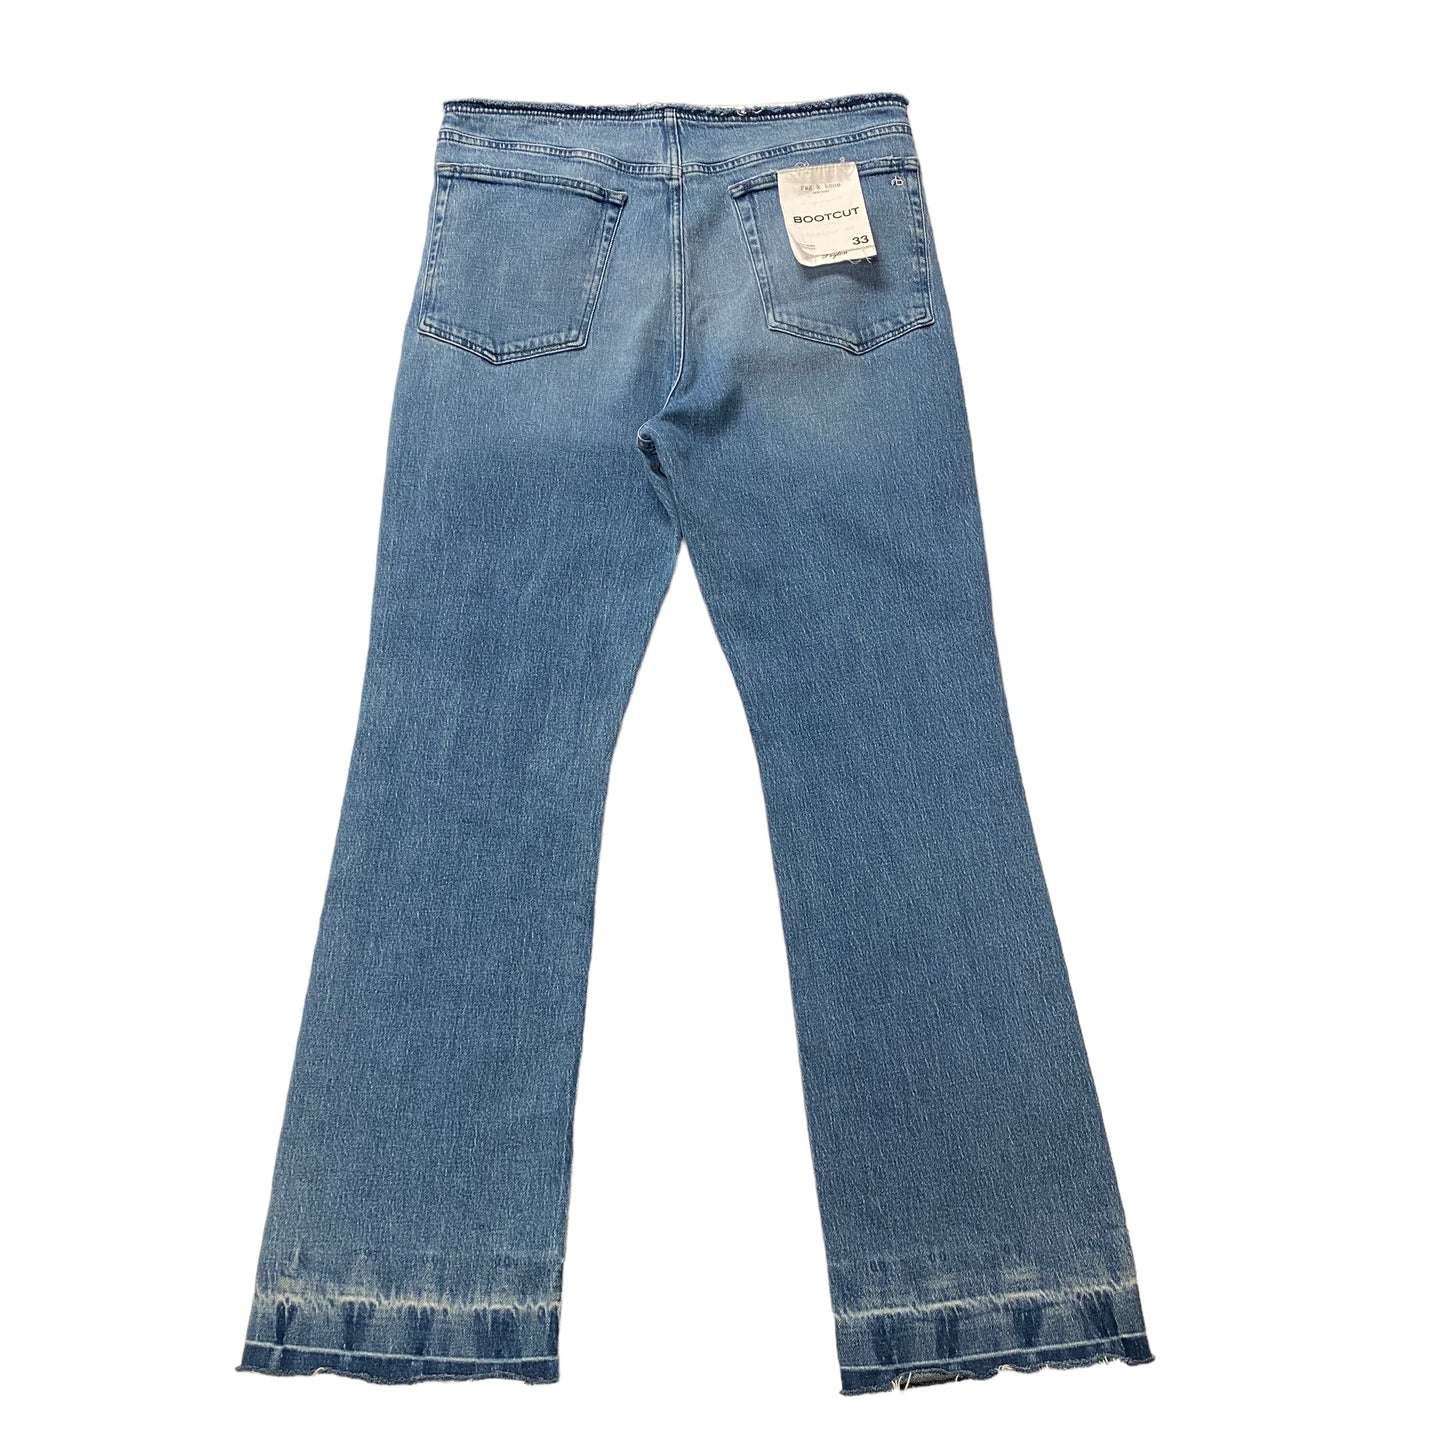 Jeans Designer By Rag And Bone  Size: 16